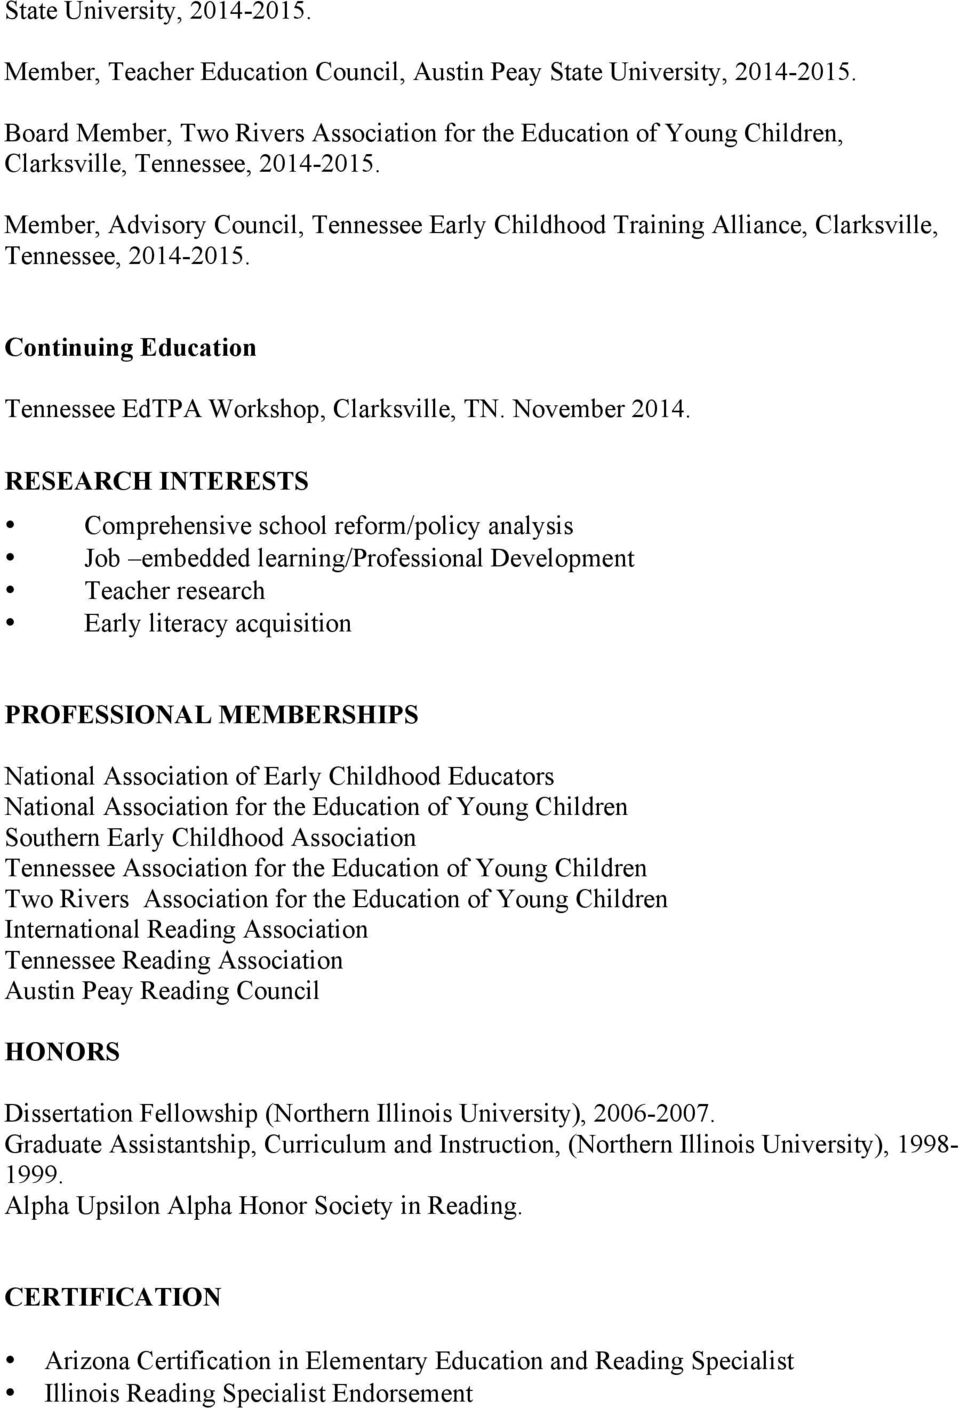 Member, Advisory Council, Tennessee Early Childhood Training Alliance, Clarksville, Tennessee, 2014-2015. Continuing Education Tennessee EdTPA Workshop, Clarksville, TN. November 2014.